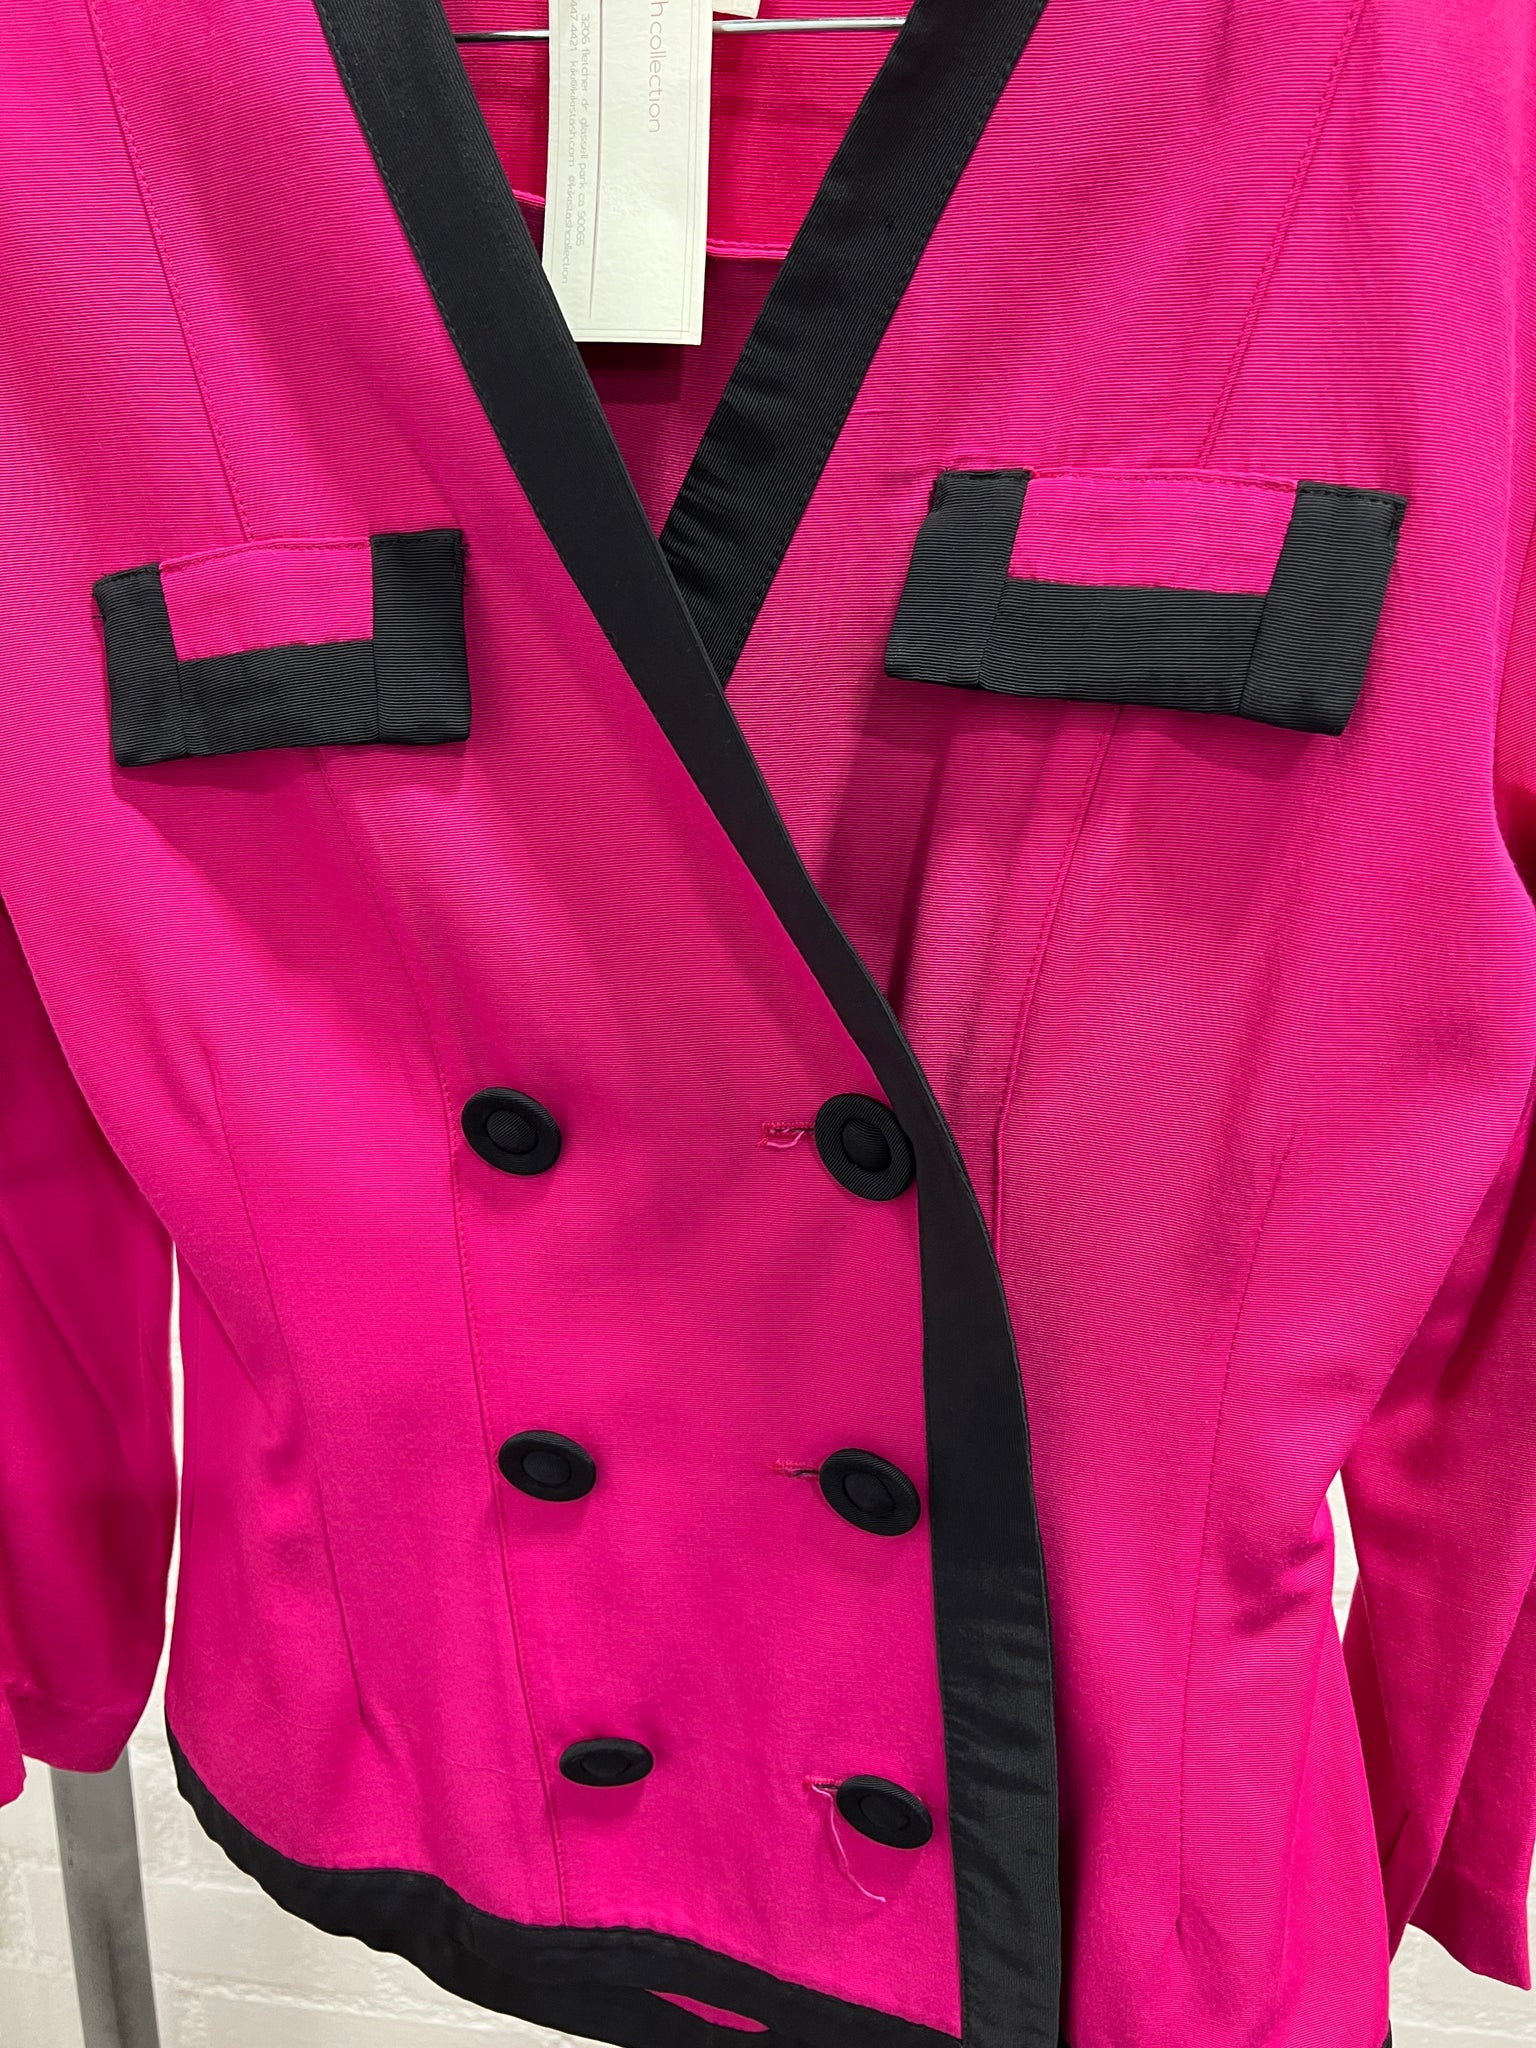 1990's 2 PIECE- SKIRT SUIT- Nina Piccalino Magenta w/ black accents